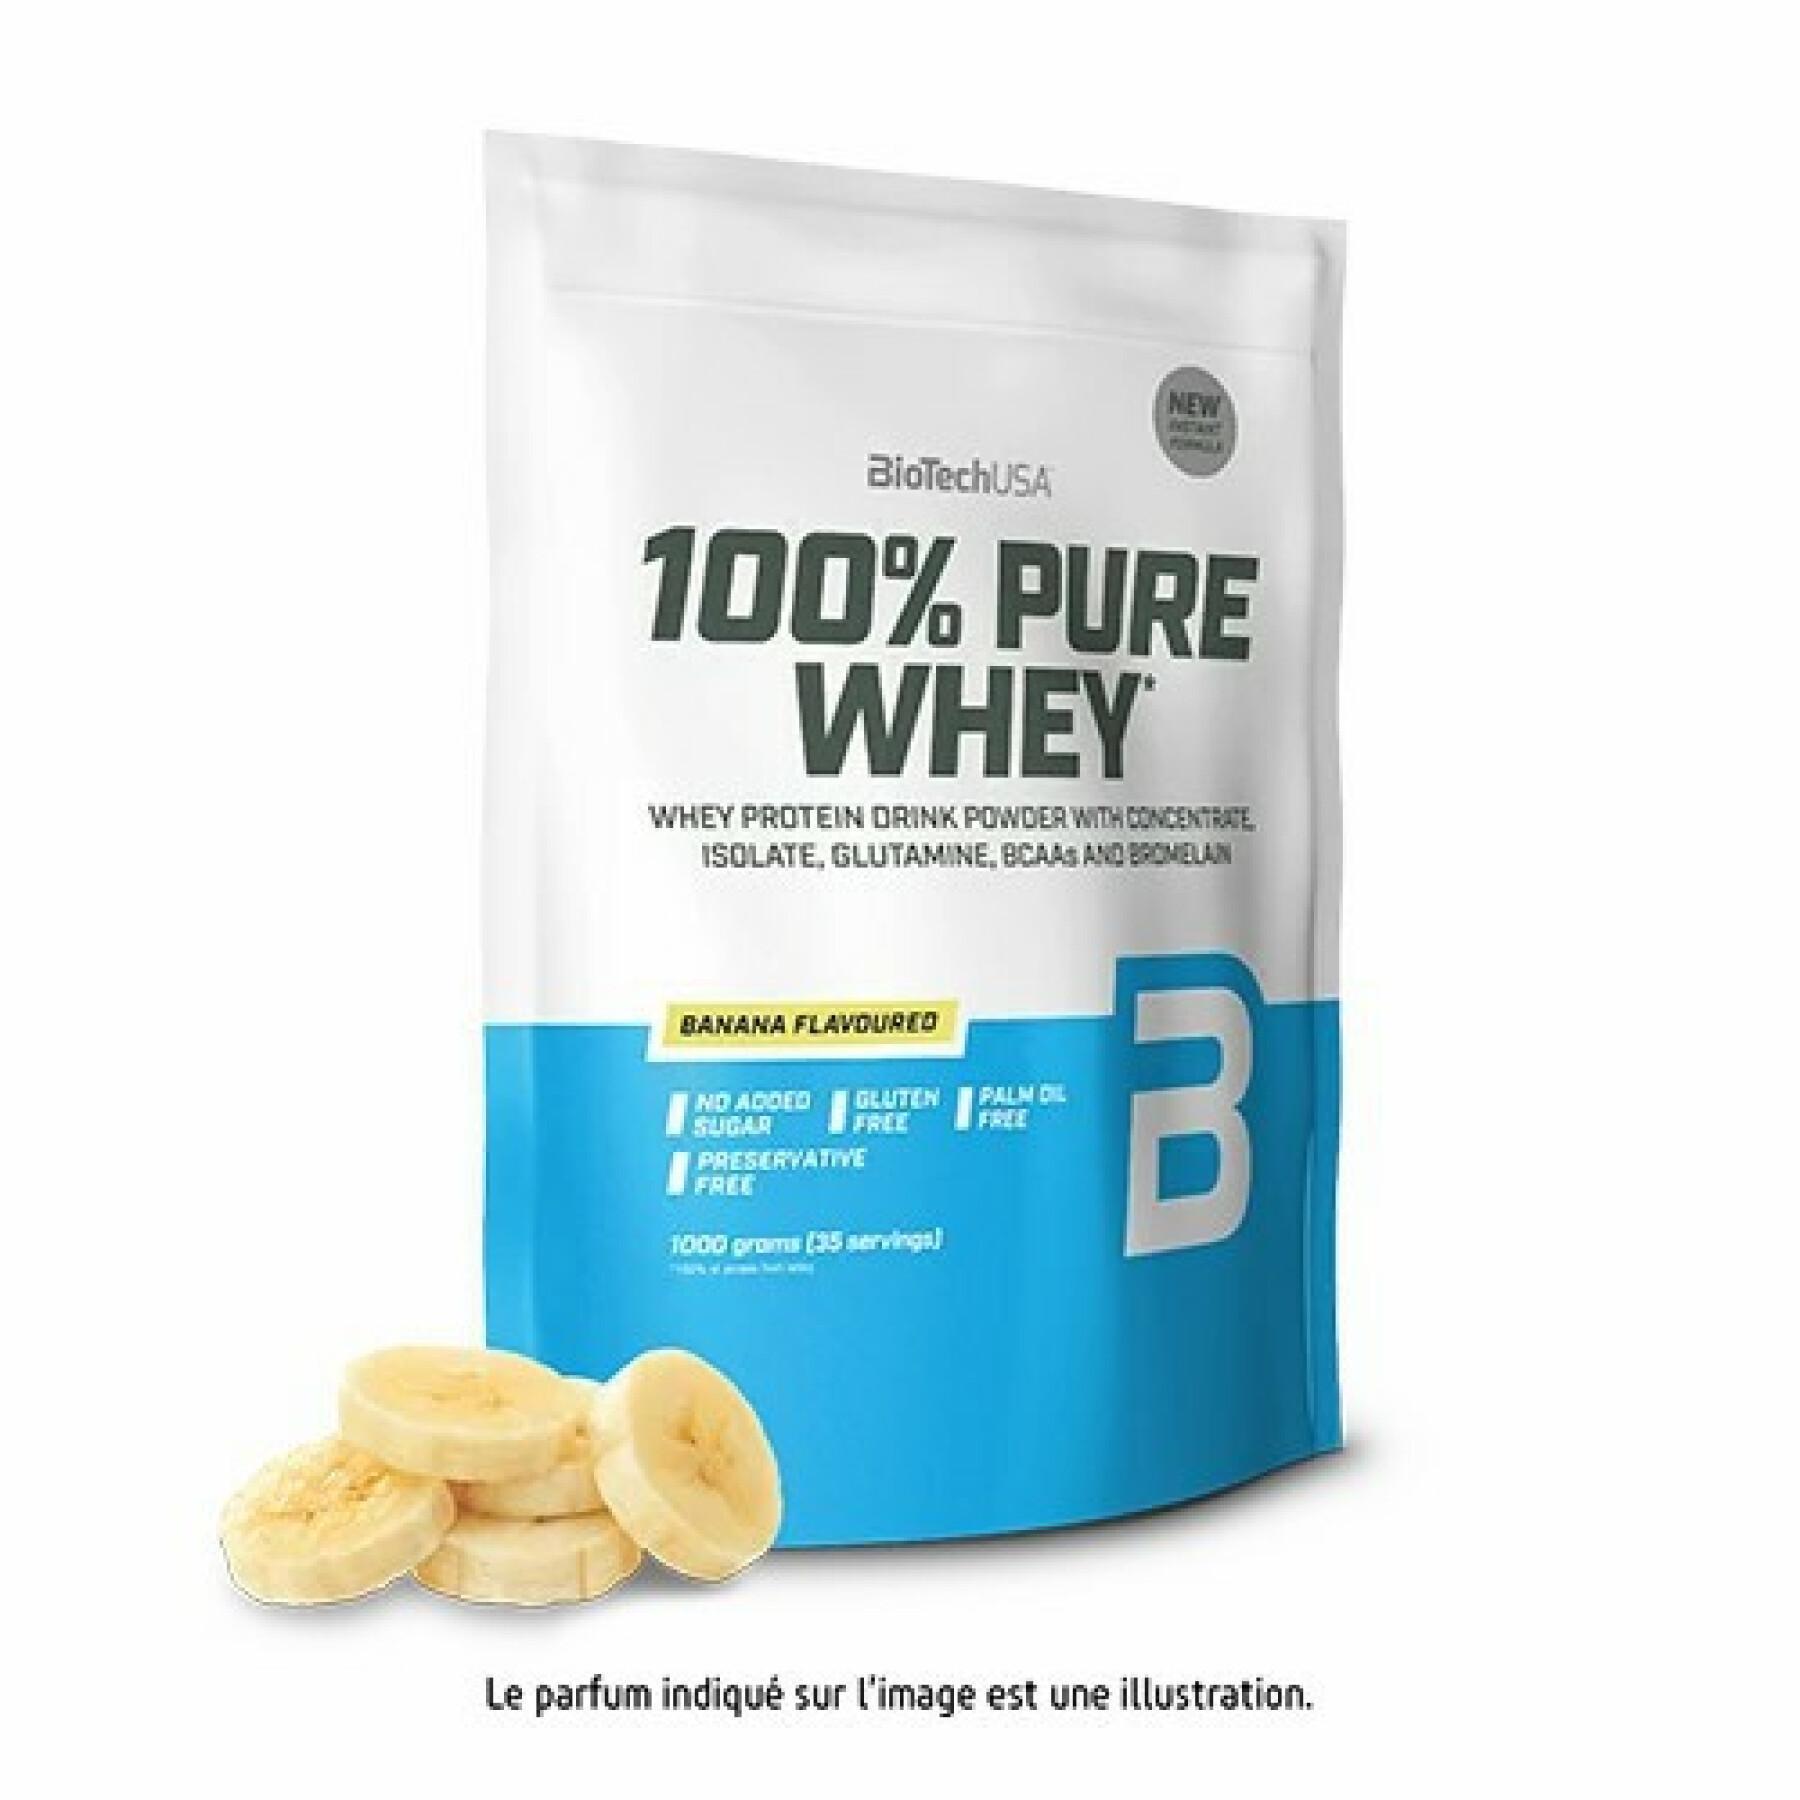 Lot of 10 bags of 100% pure whey protein Biotech USA - Banane - 1kg